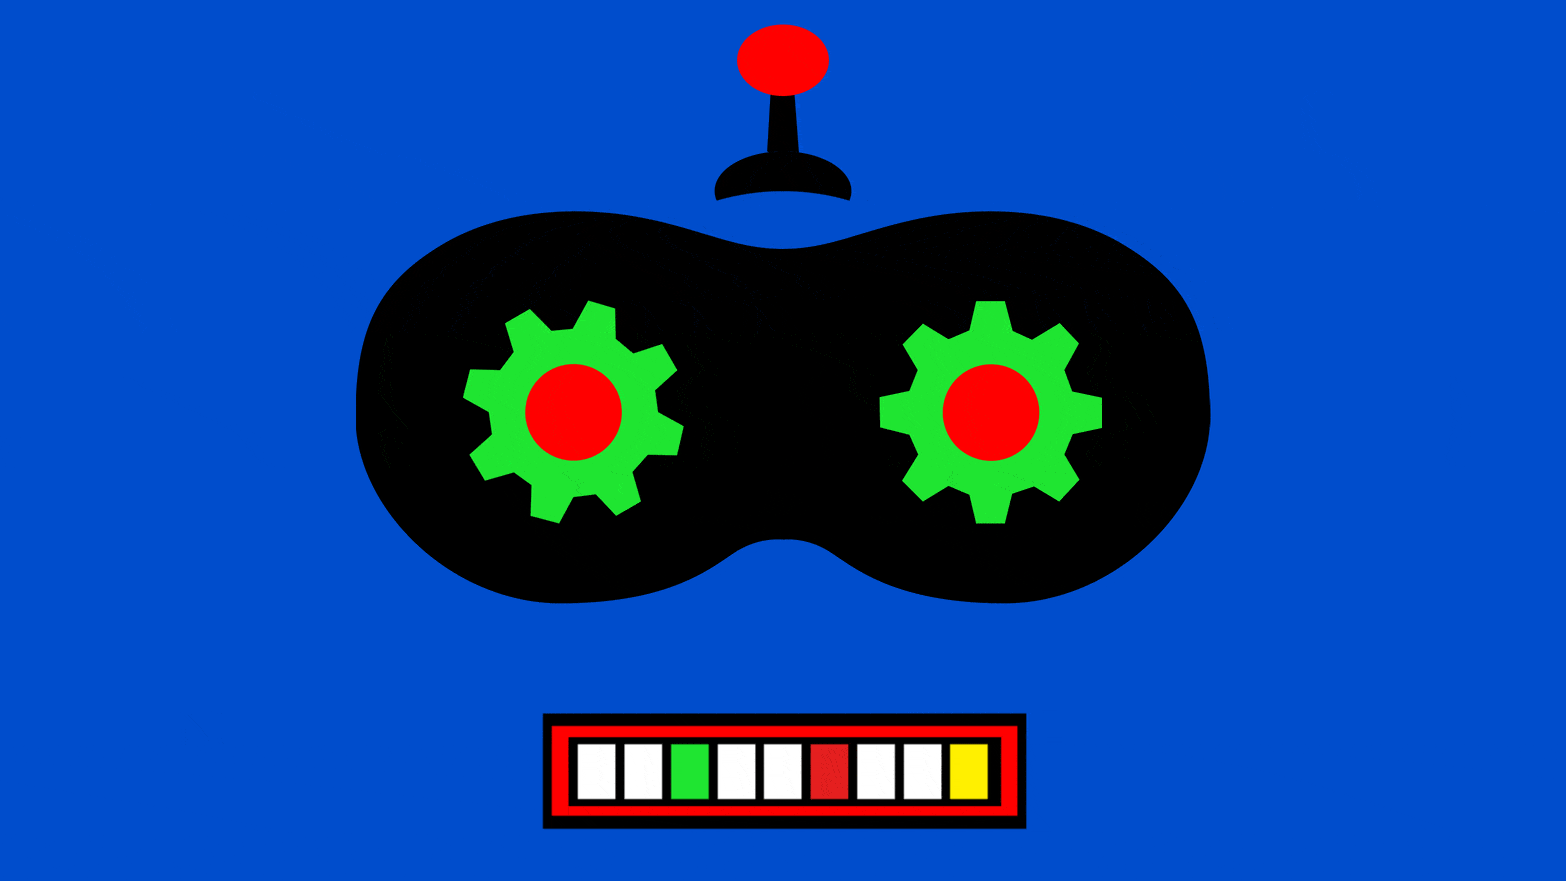 Illustrated gif of a robot face with a dark villainous eye mask with gears turning and a mouth changing different colors.